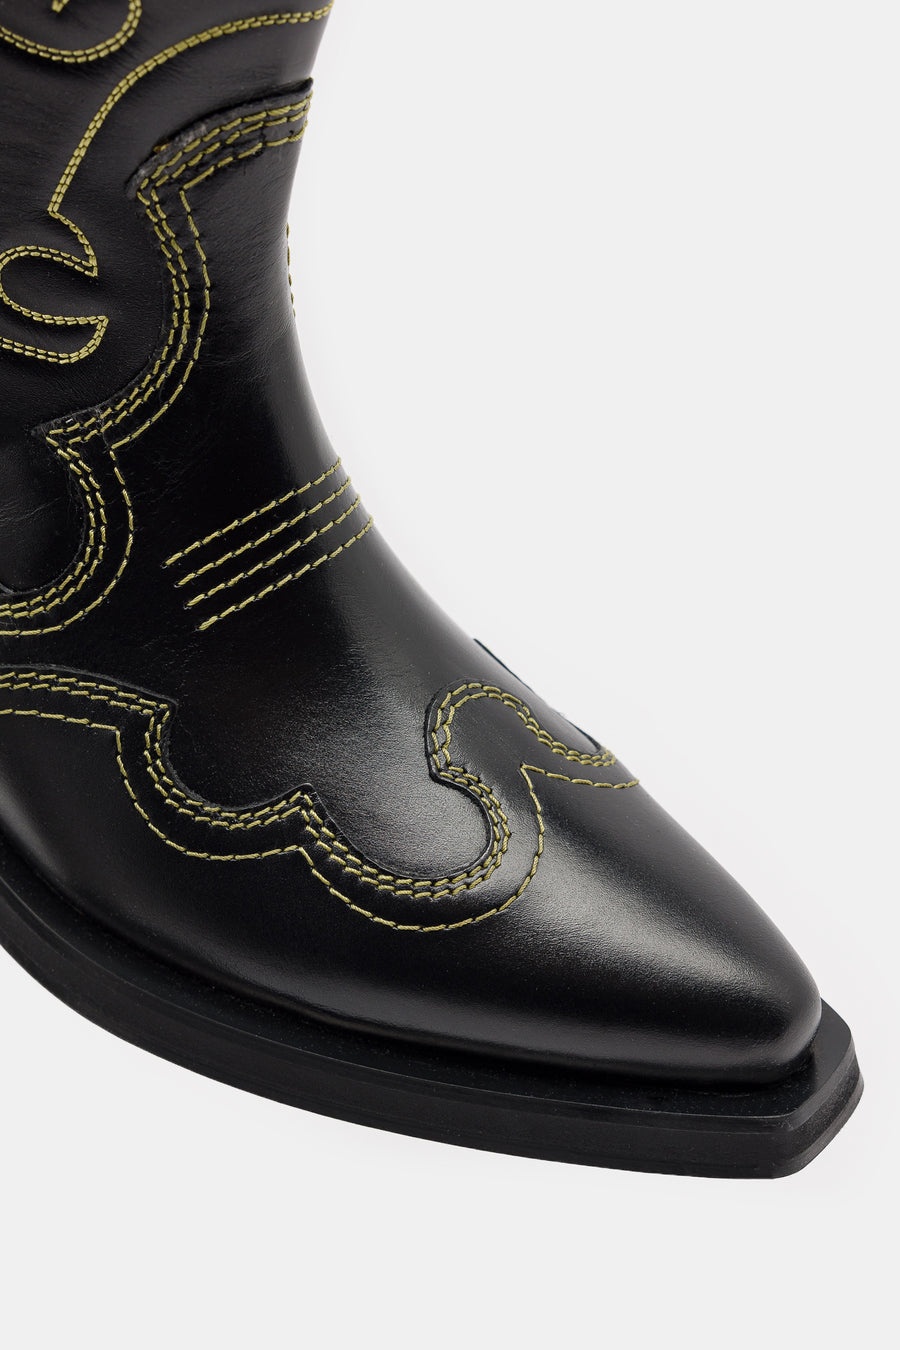 Mid Shaft Embroidered Western Boot in Black/Yellow - 5